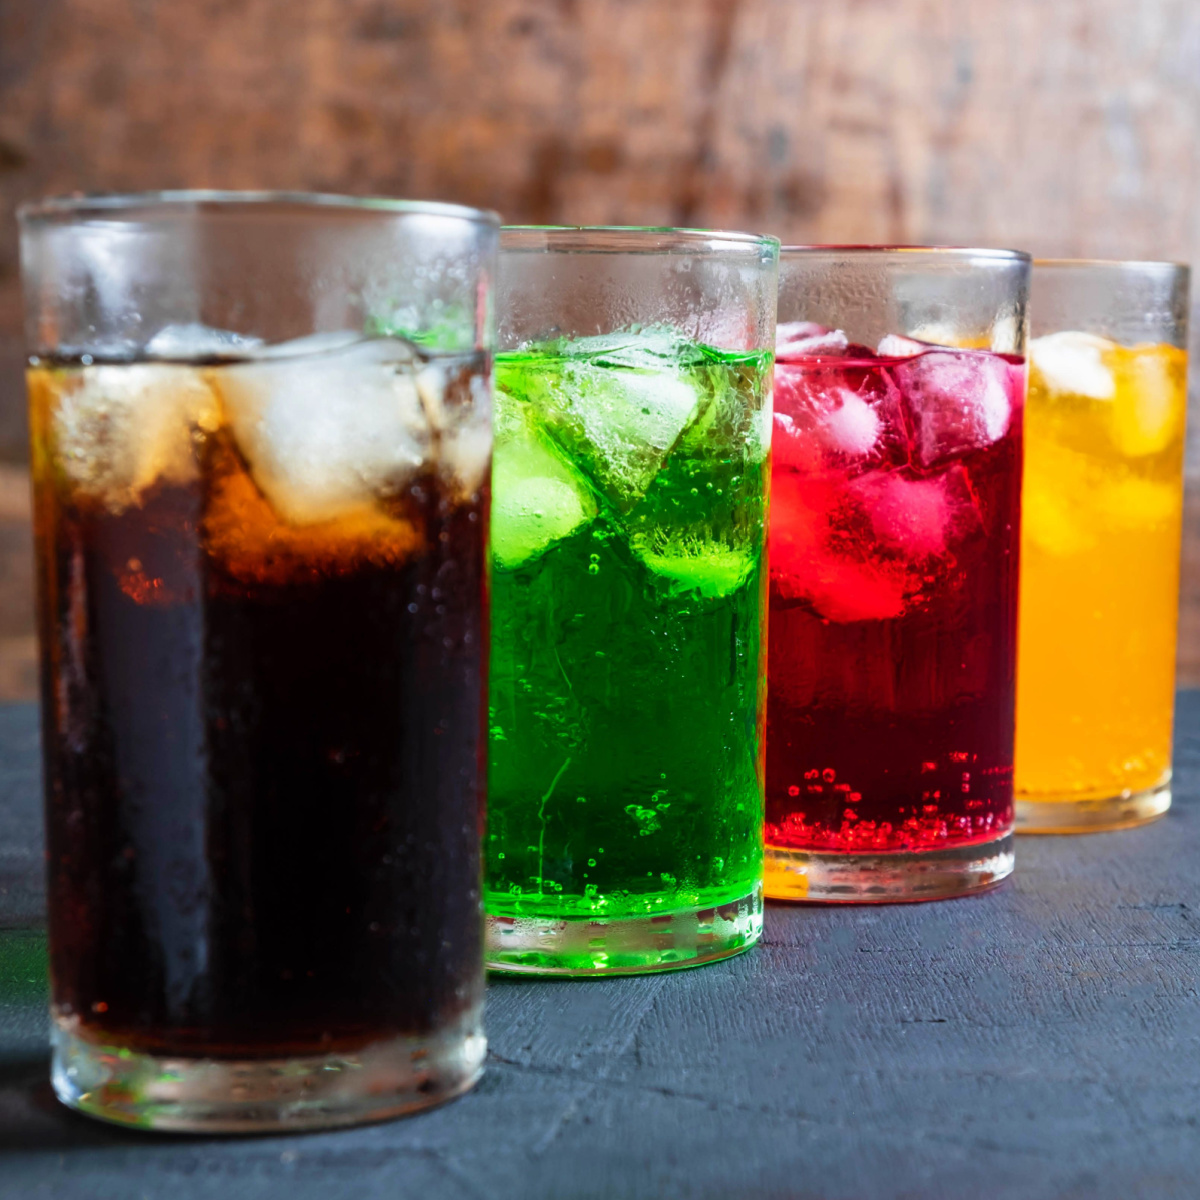 varous sodas in glass cups